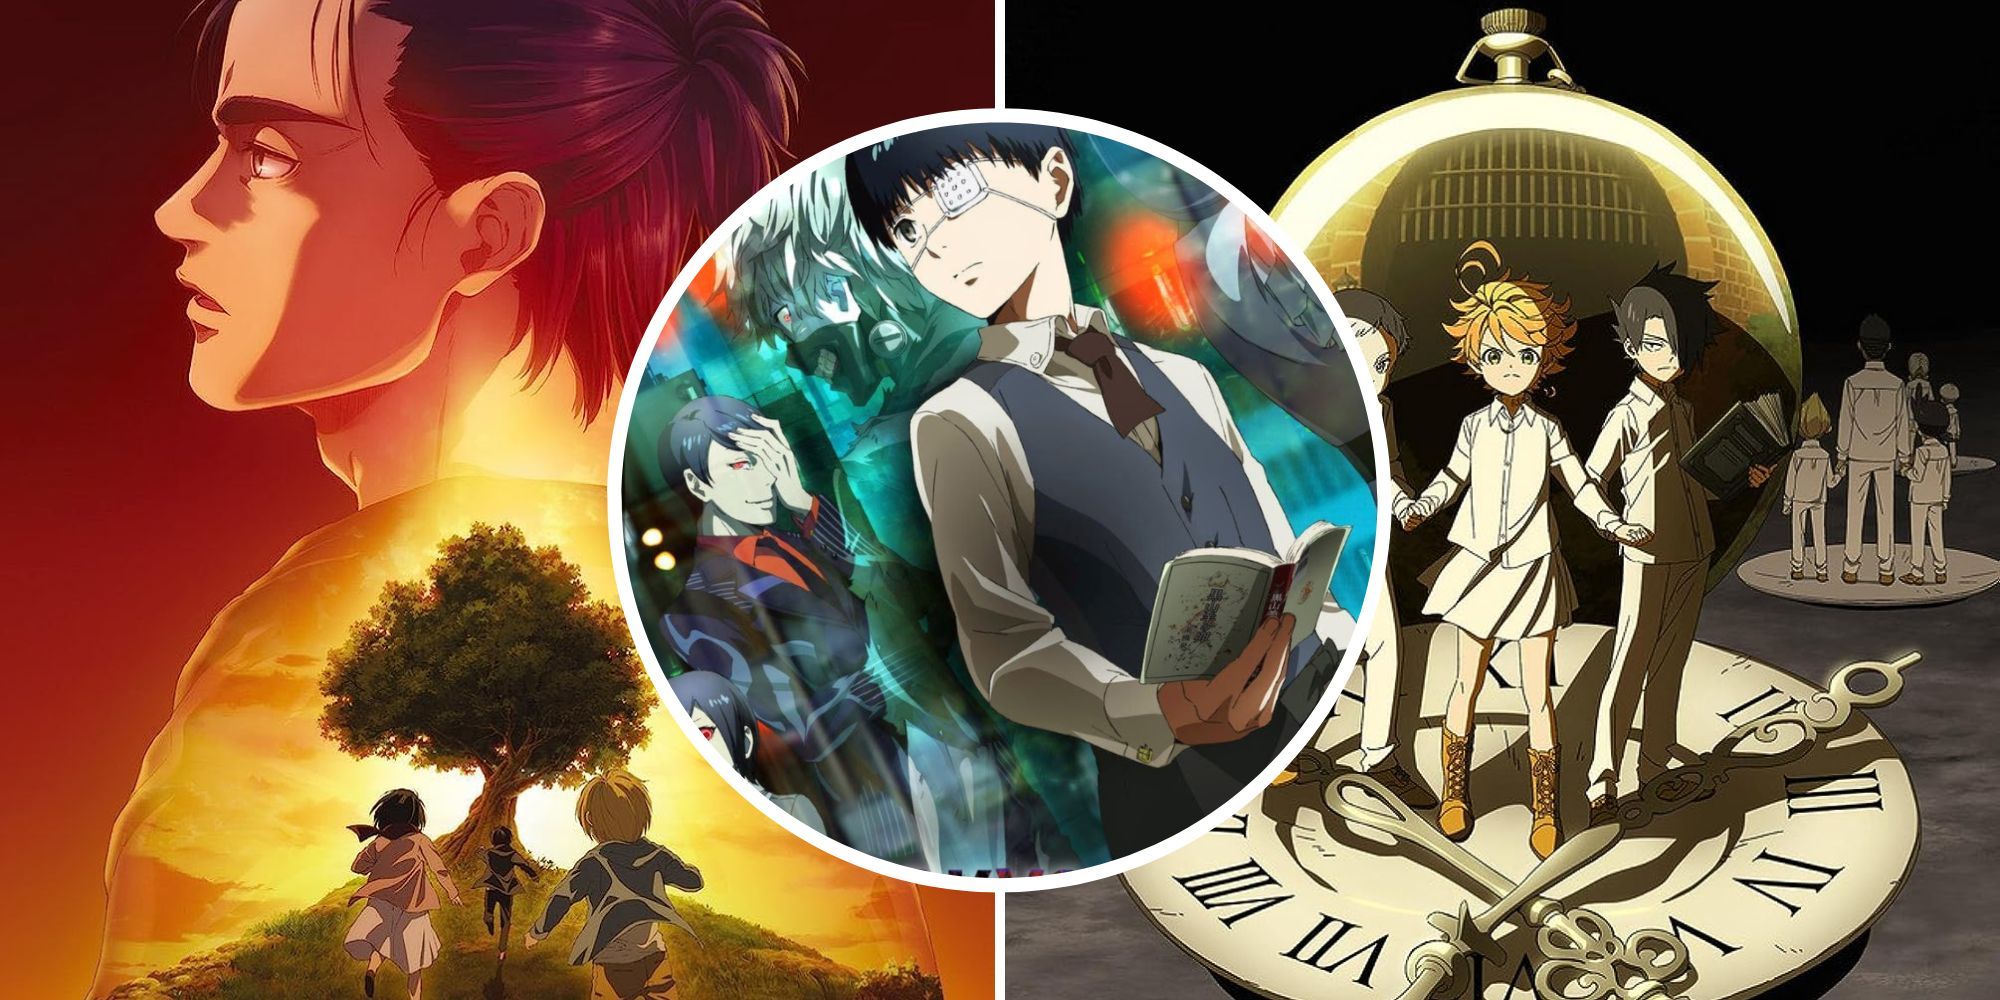 Attack On Titan, Tokyo Ghoul, and The Promised Neverland